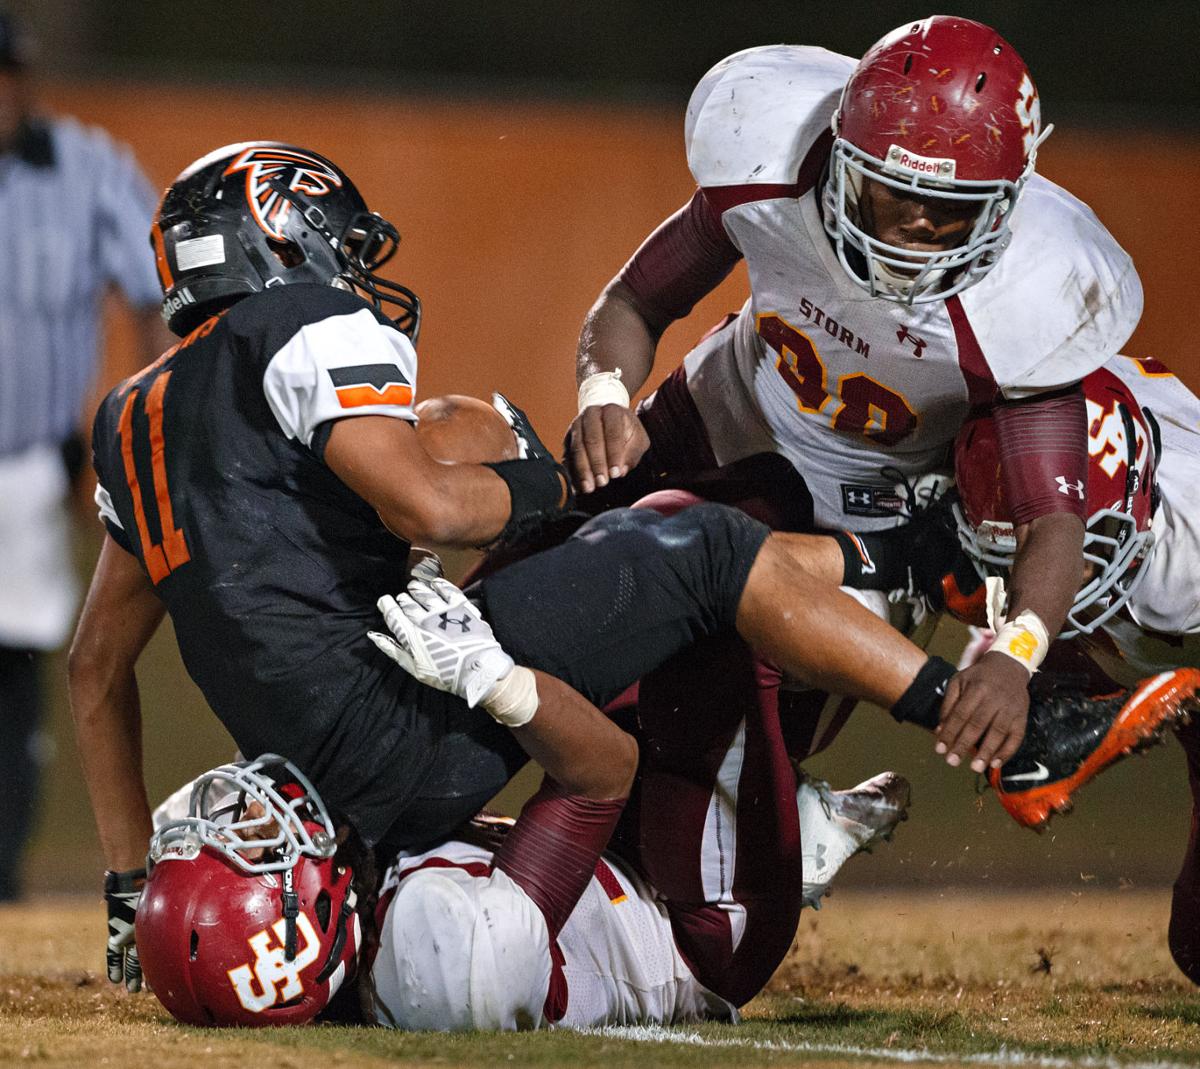 High School Football 2014: Southern Guilford at Southeast Guilford